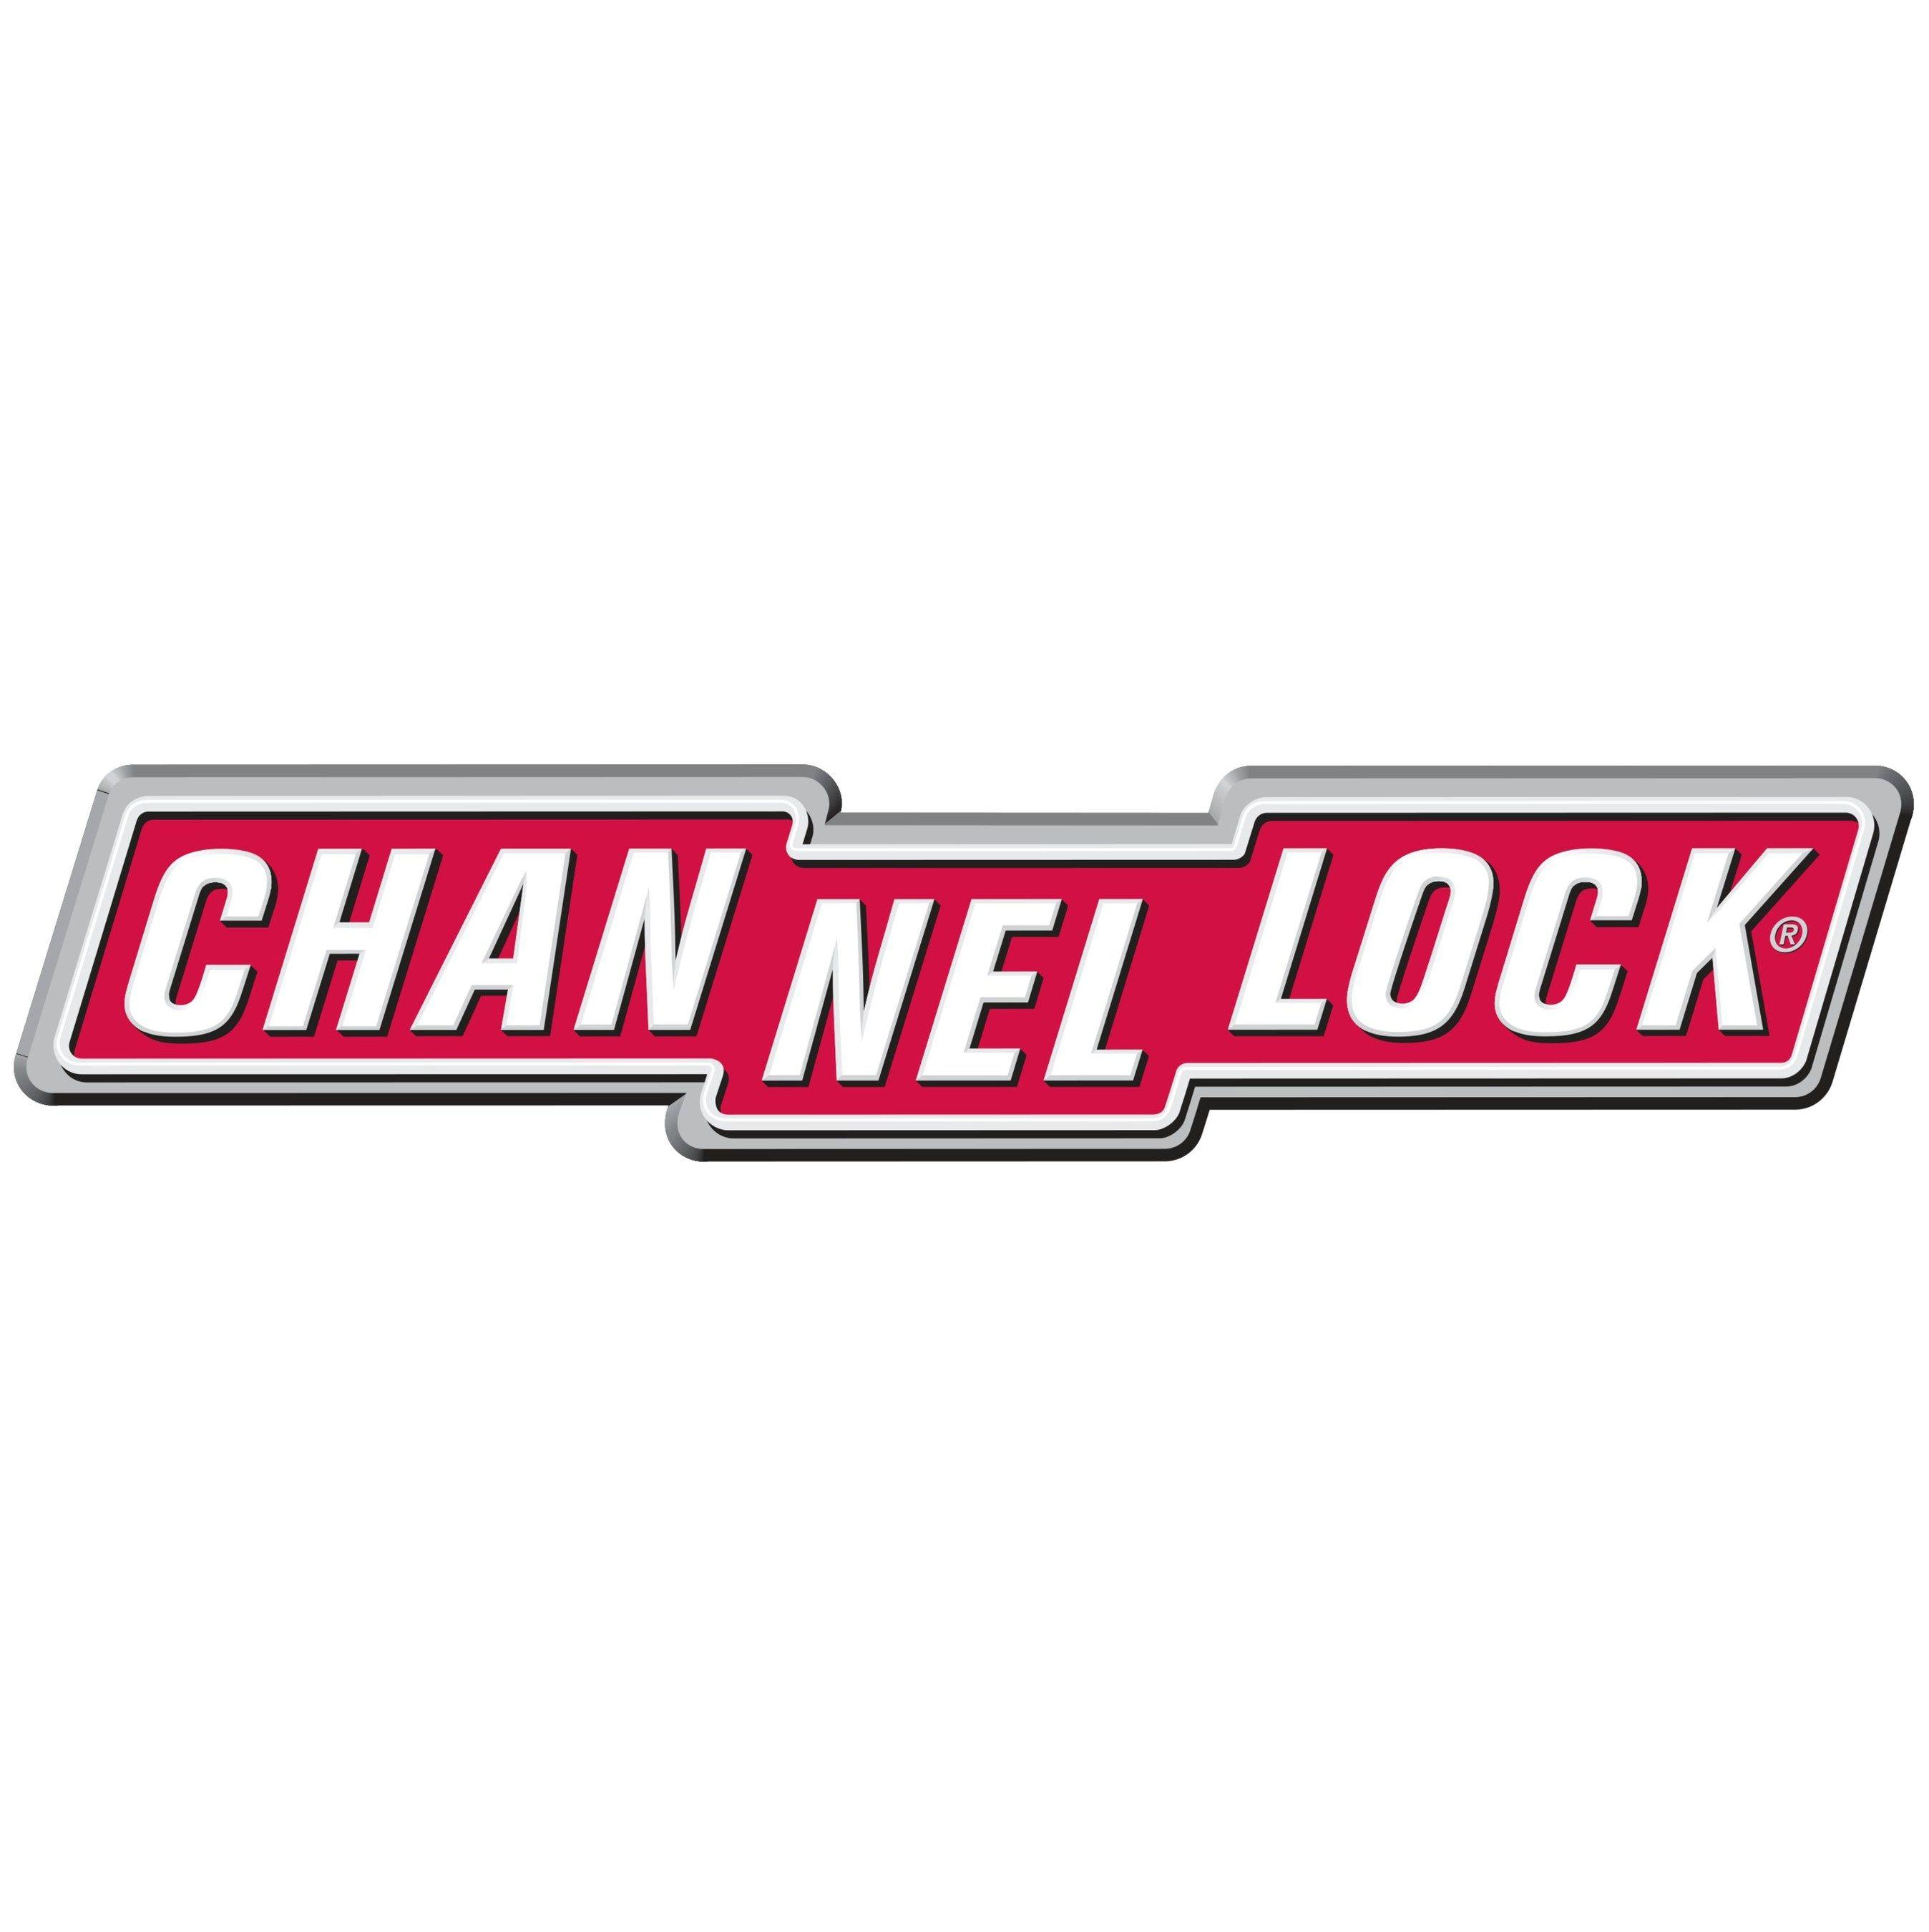 Channellock Logo - Channellock® Announces 2019 Trade School Trade-Up Competition